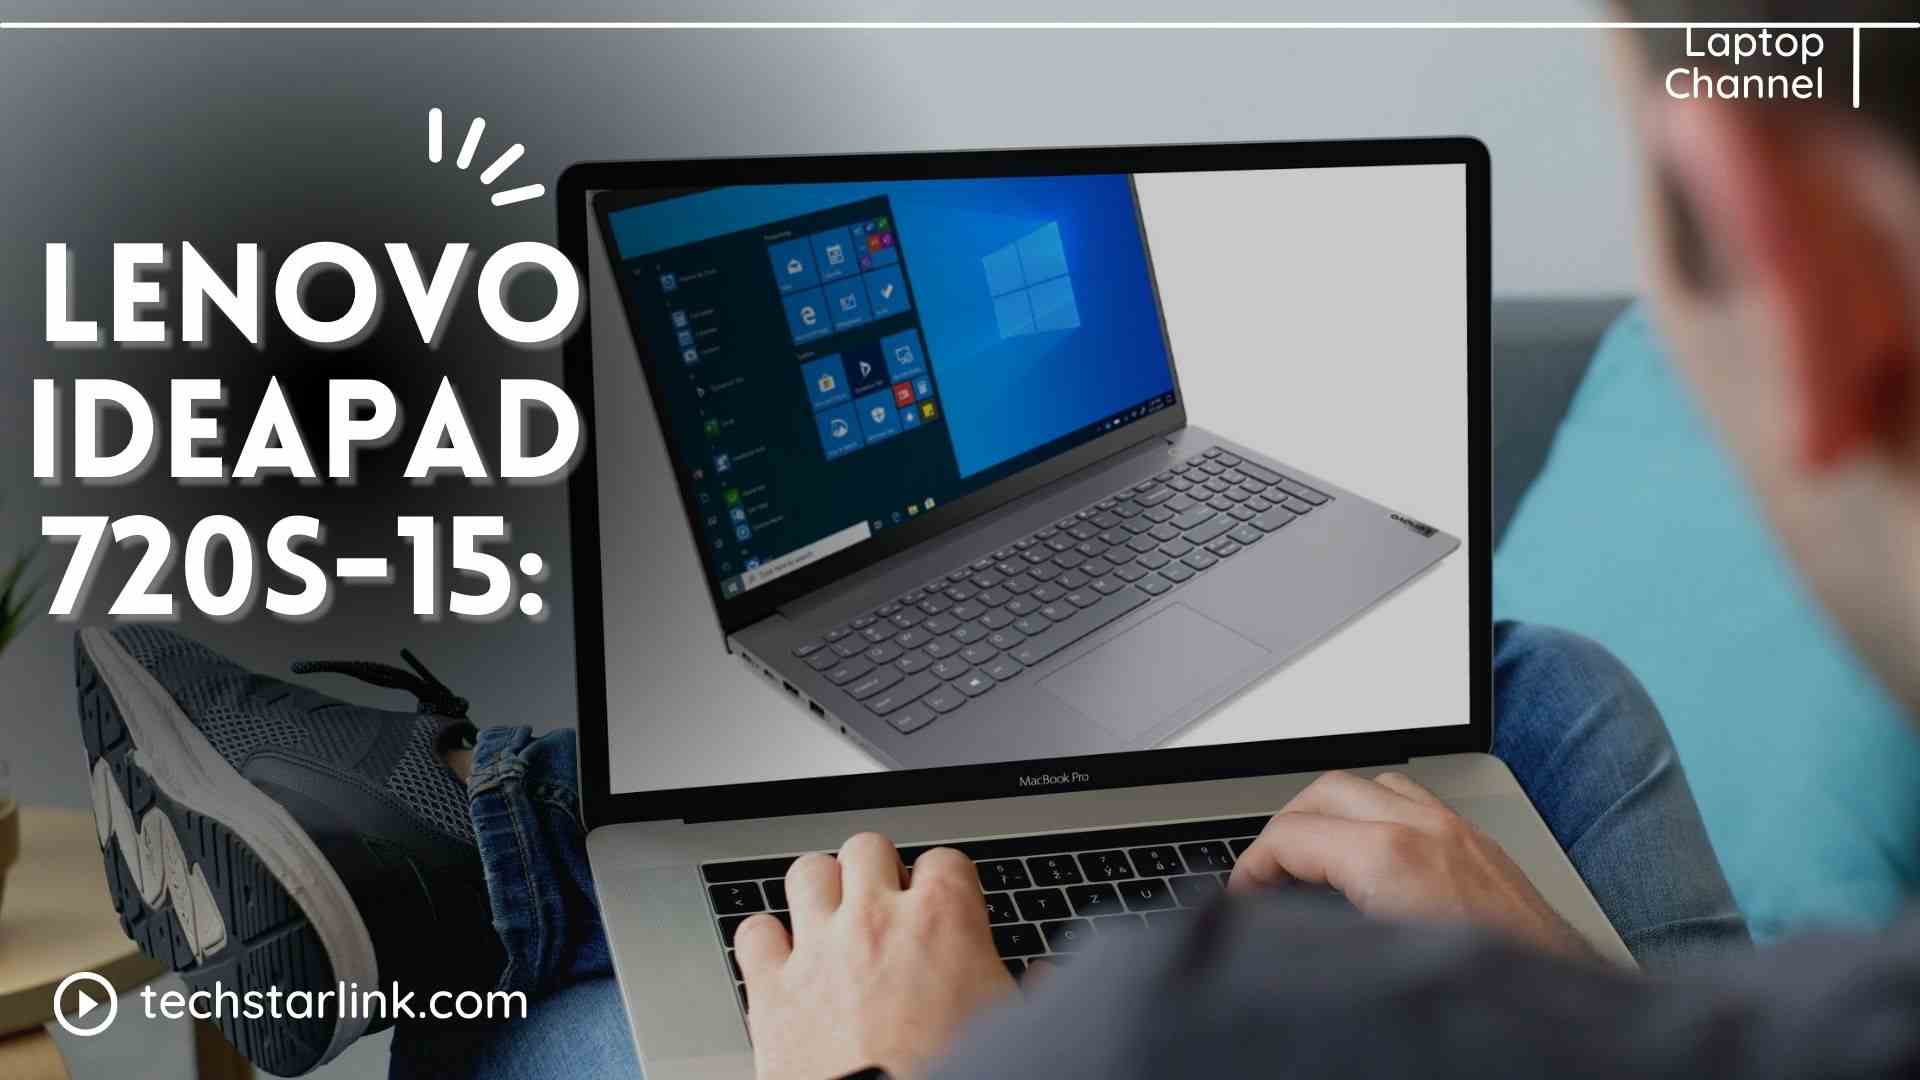 Lenovo IdeaPad 720s-15: Complete Review of Specs, Drawbacks & FAQS